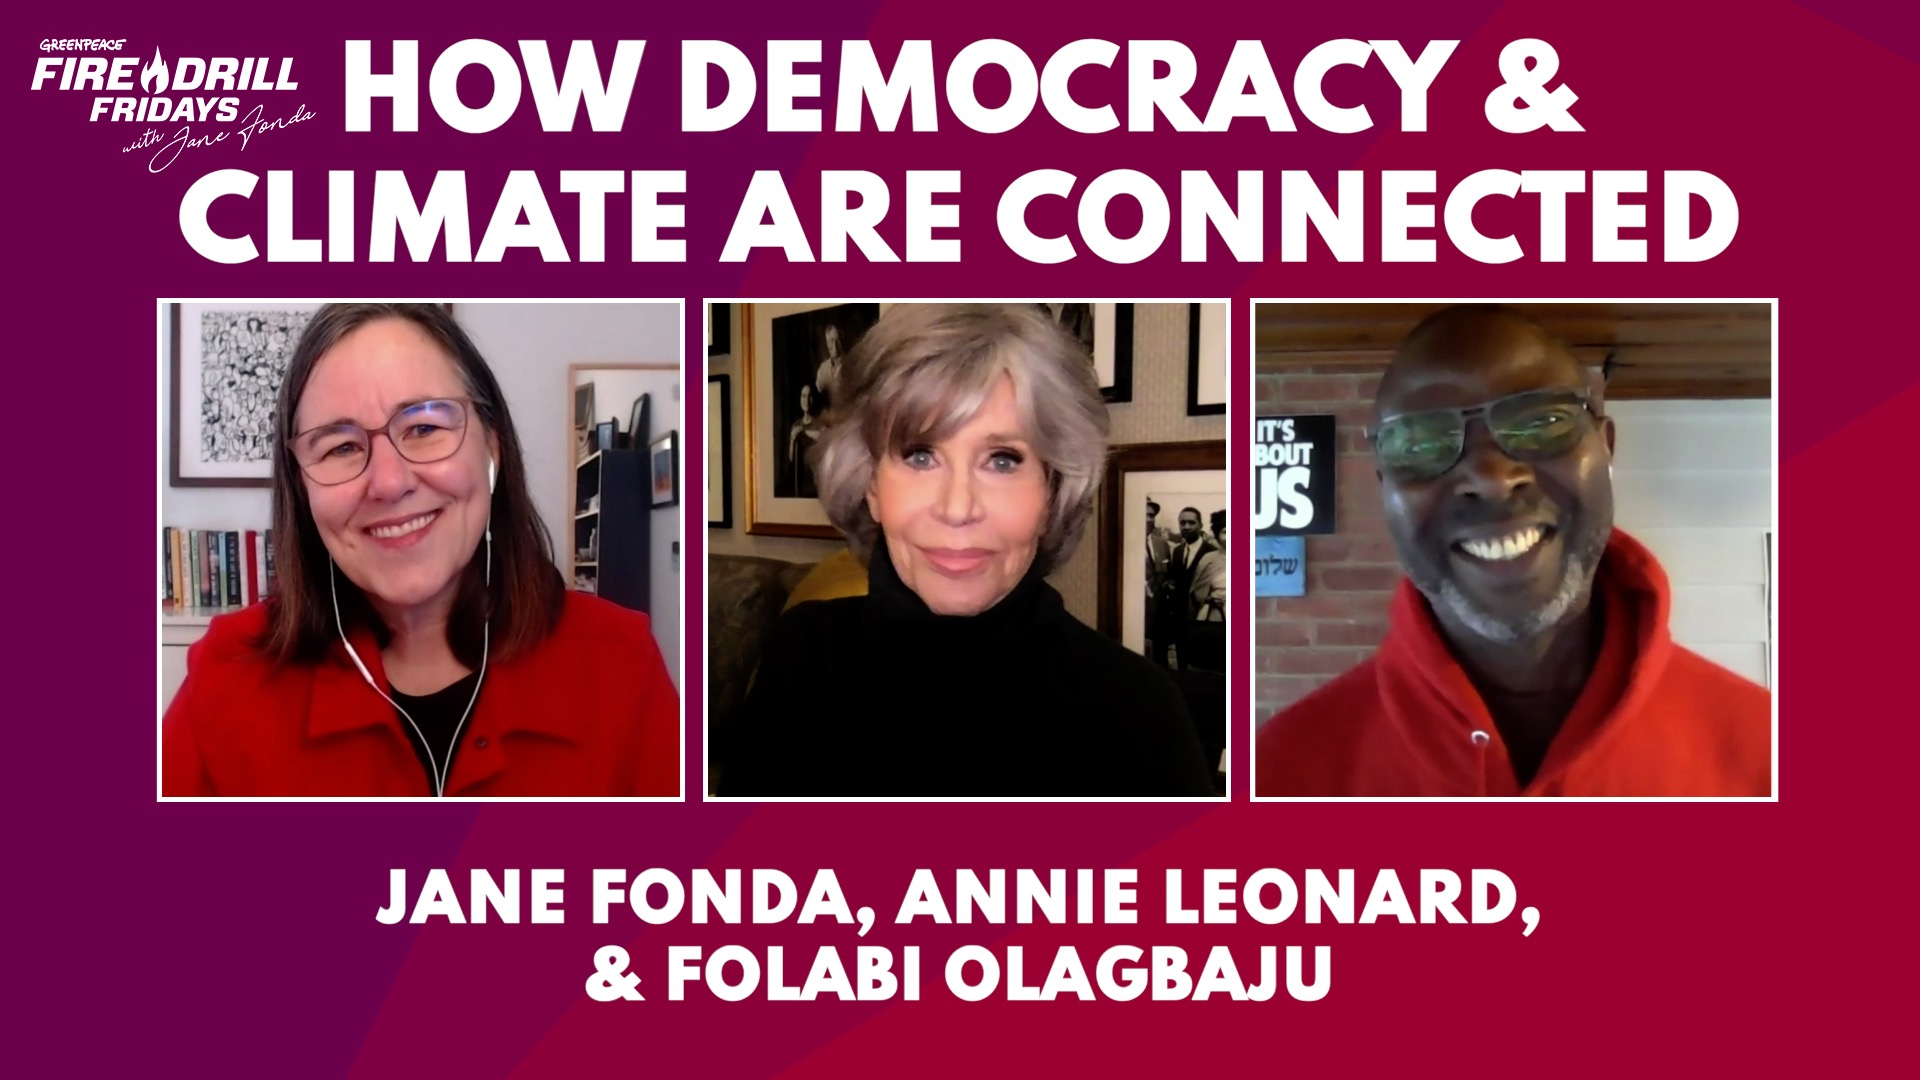 Watch Annie Leonard & Folabi Olagbaju on How 2022 Will be a People Powered Year for Climate and Democracy